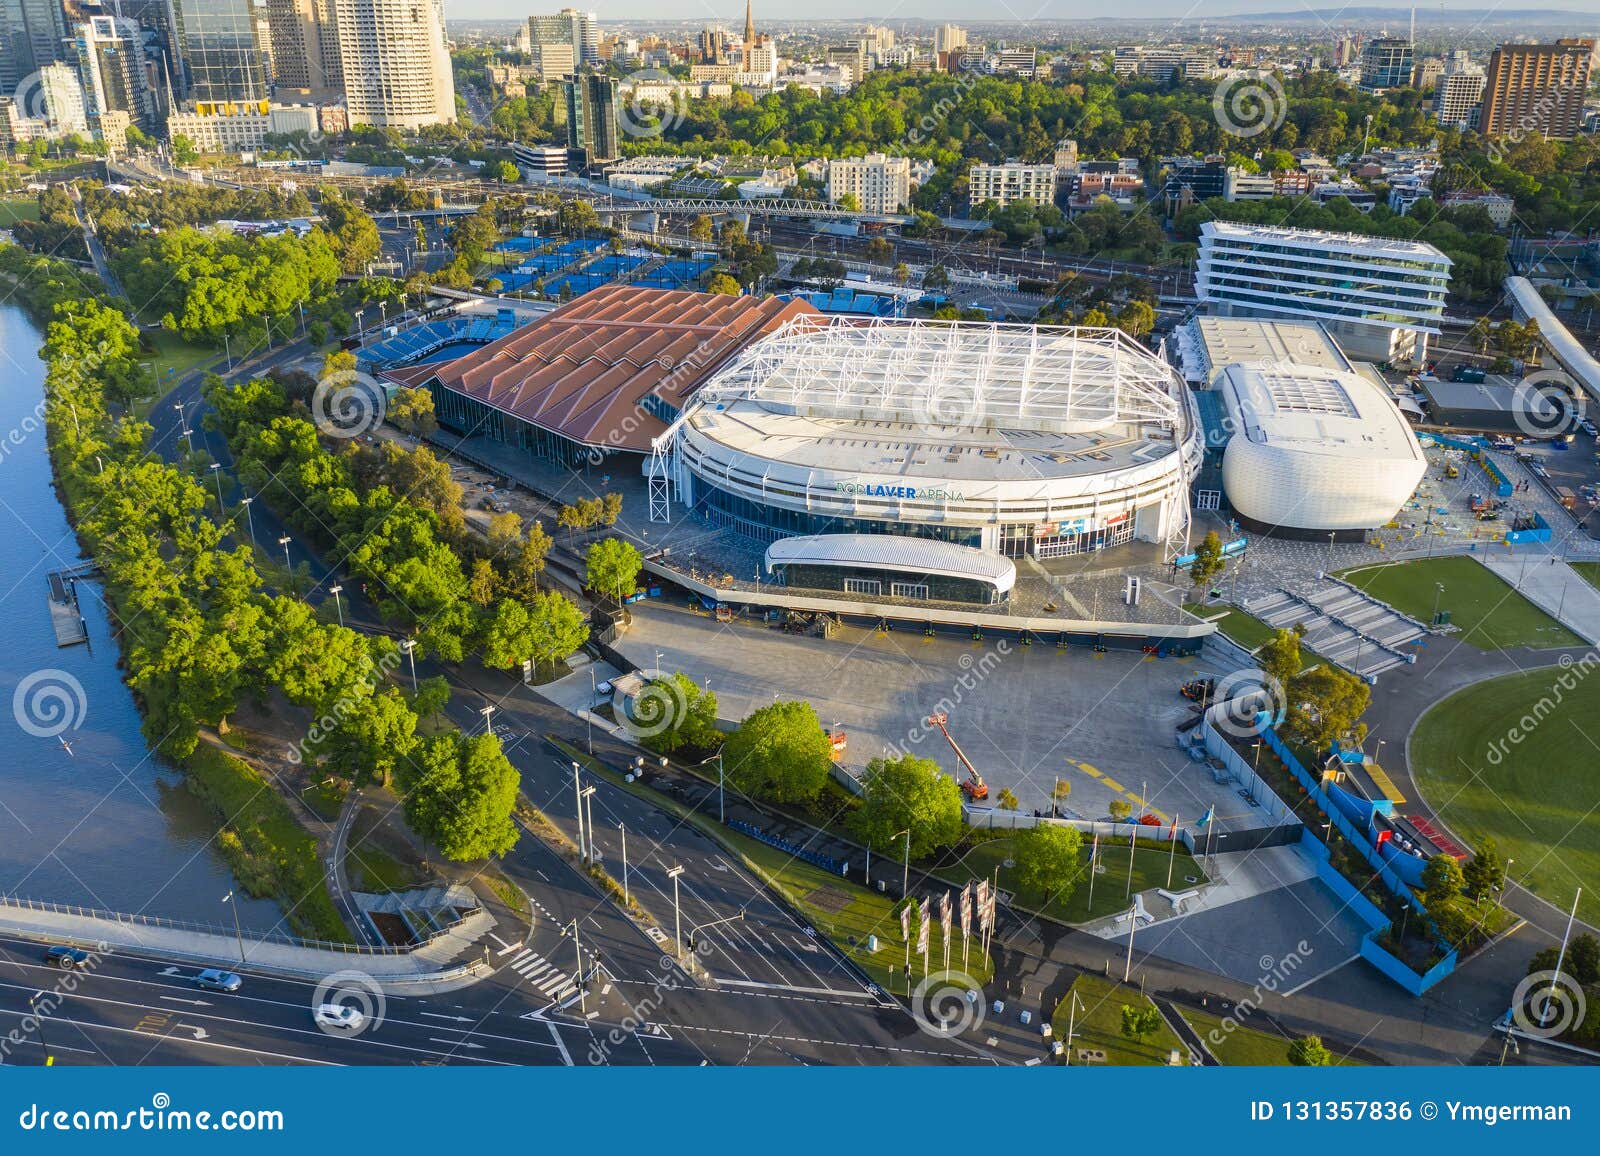 Aerial View of Melbourne Park, Home of the Australian Open Tennis Tournament Photo - Image of view, stadium: 131357836